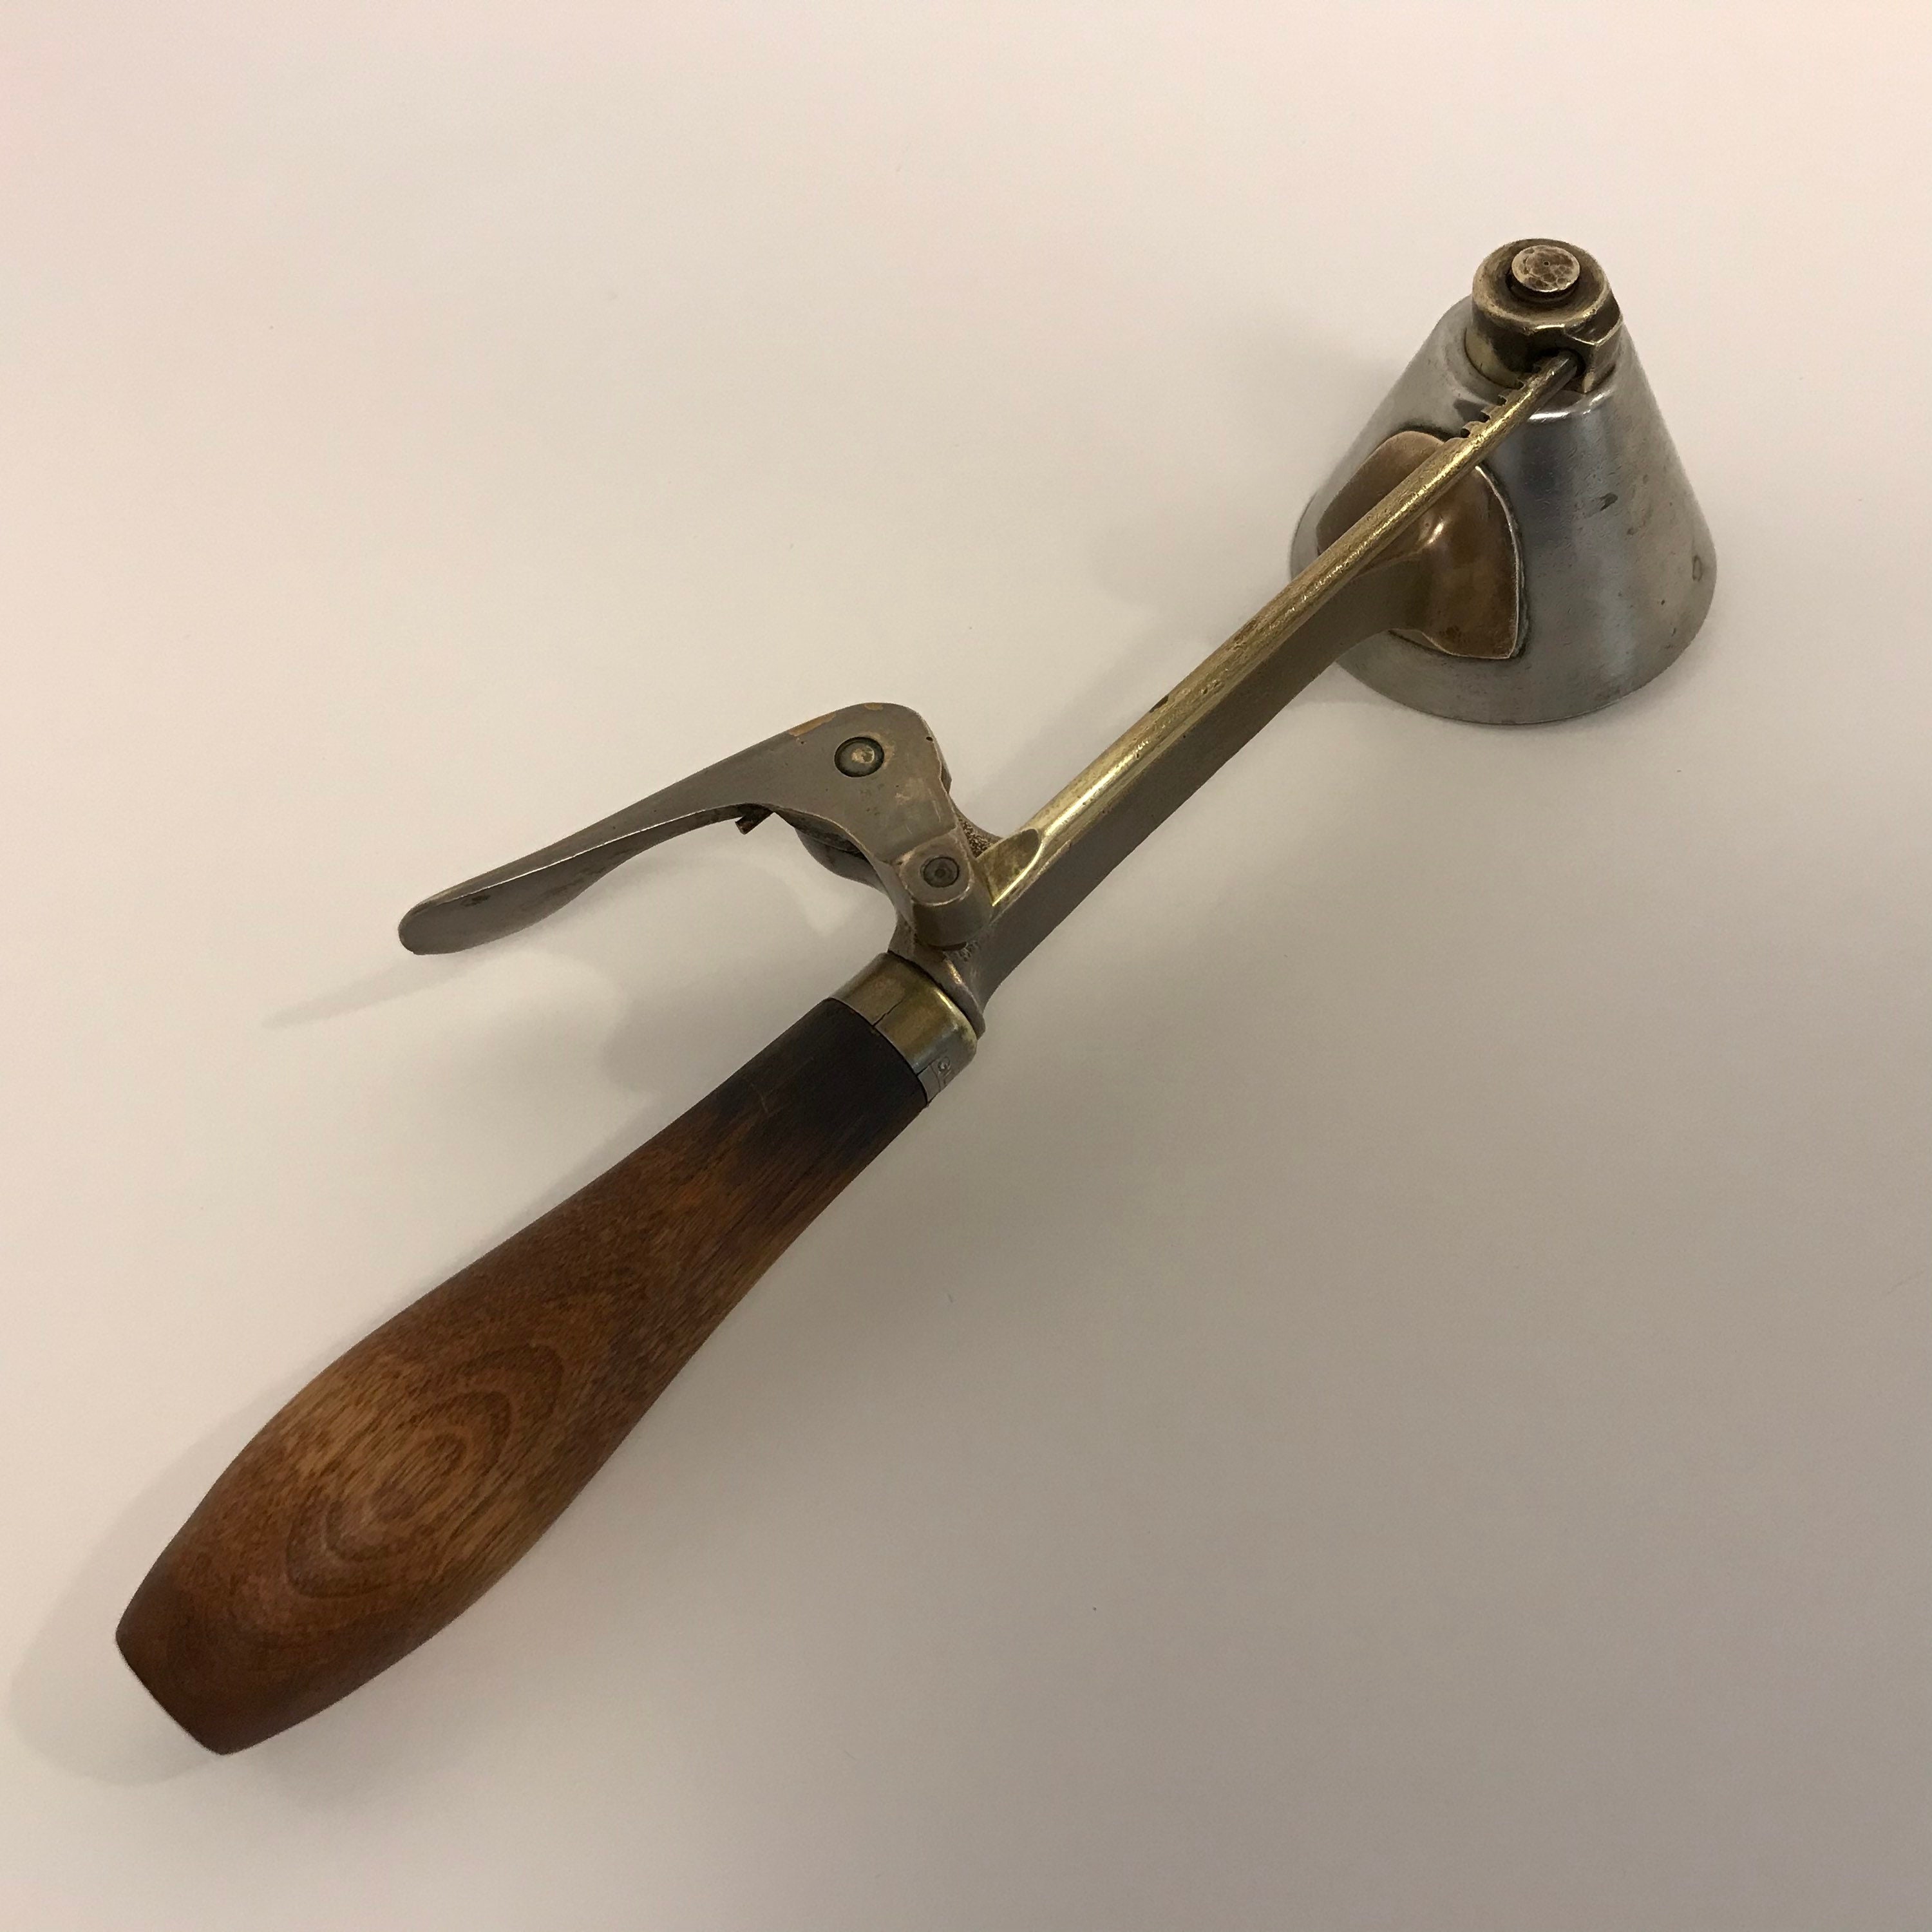 This Old Time Ice Cream Scoop Makes Cylinders, Not Spheres